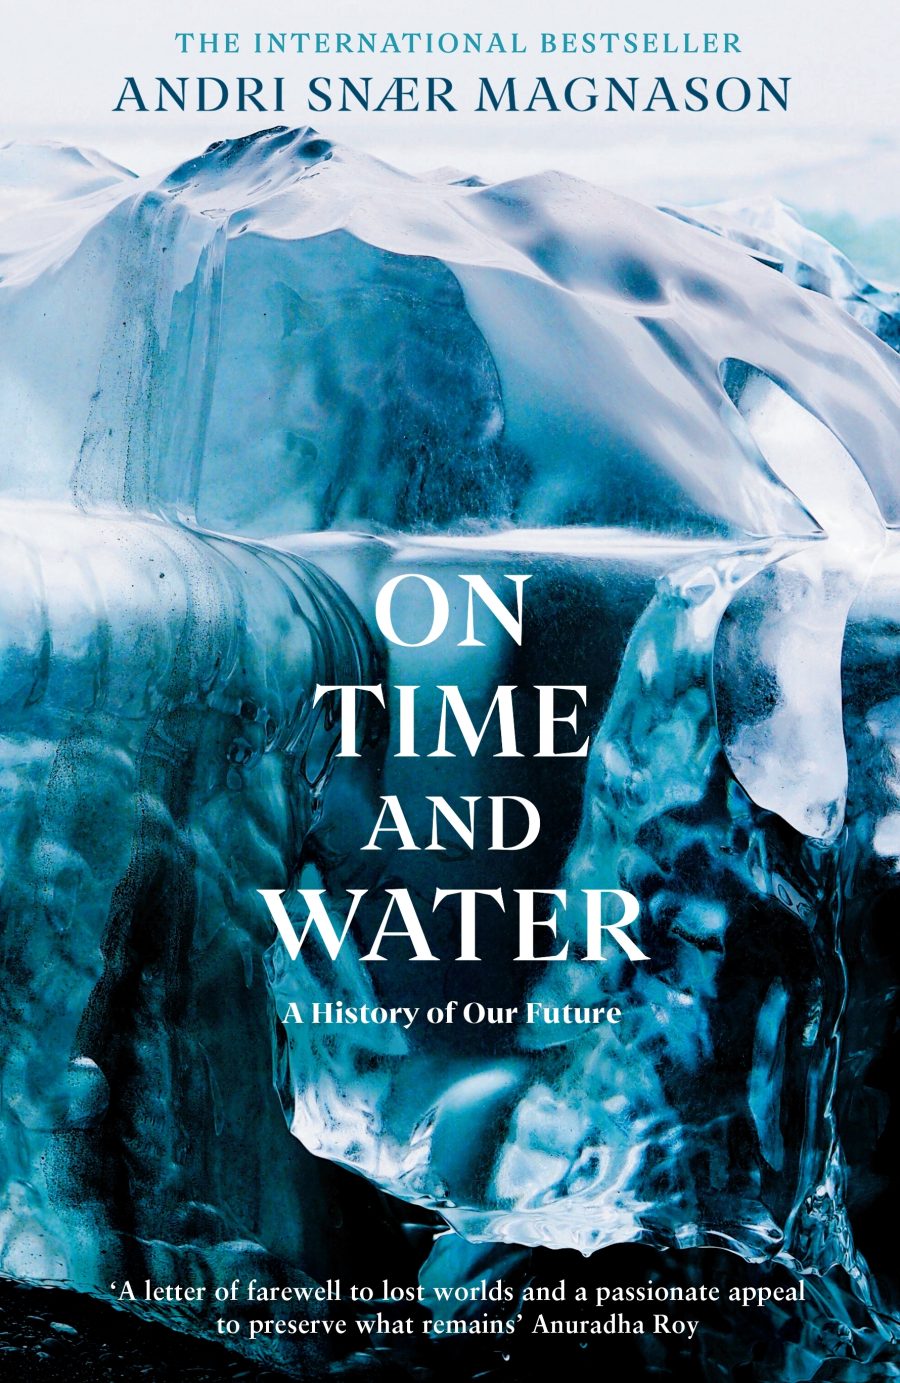 Andry snaer magnason time water